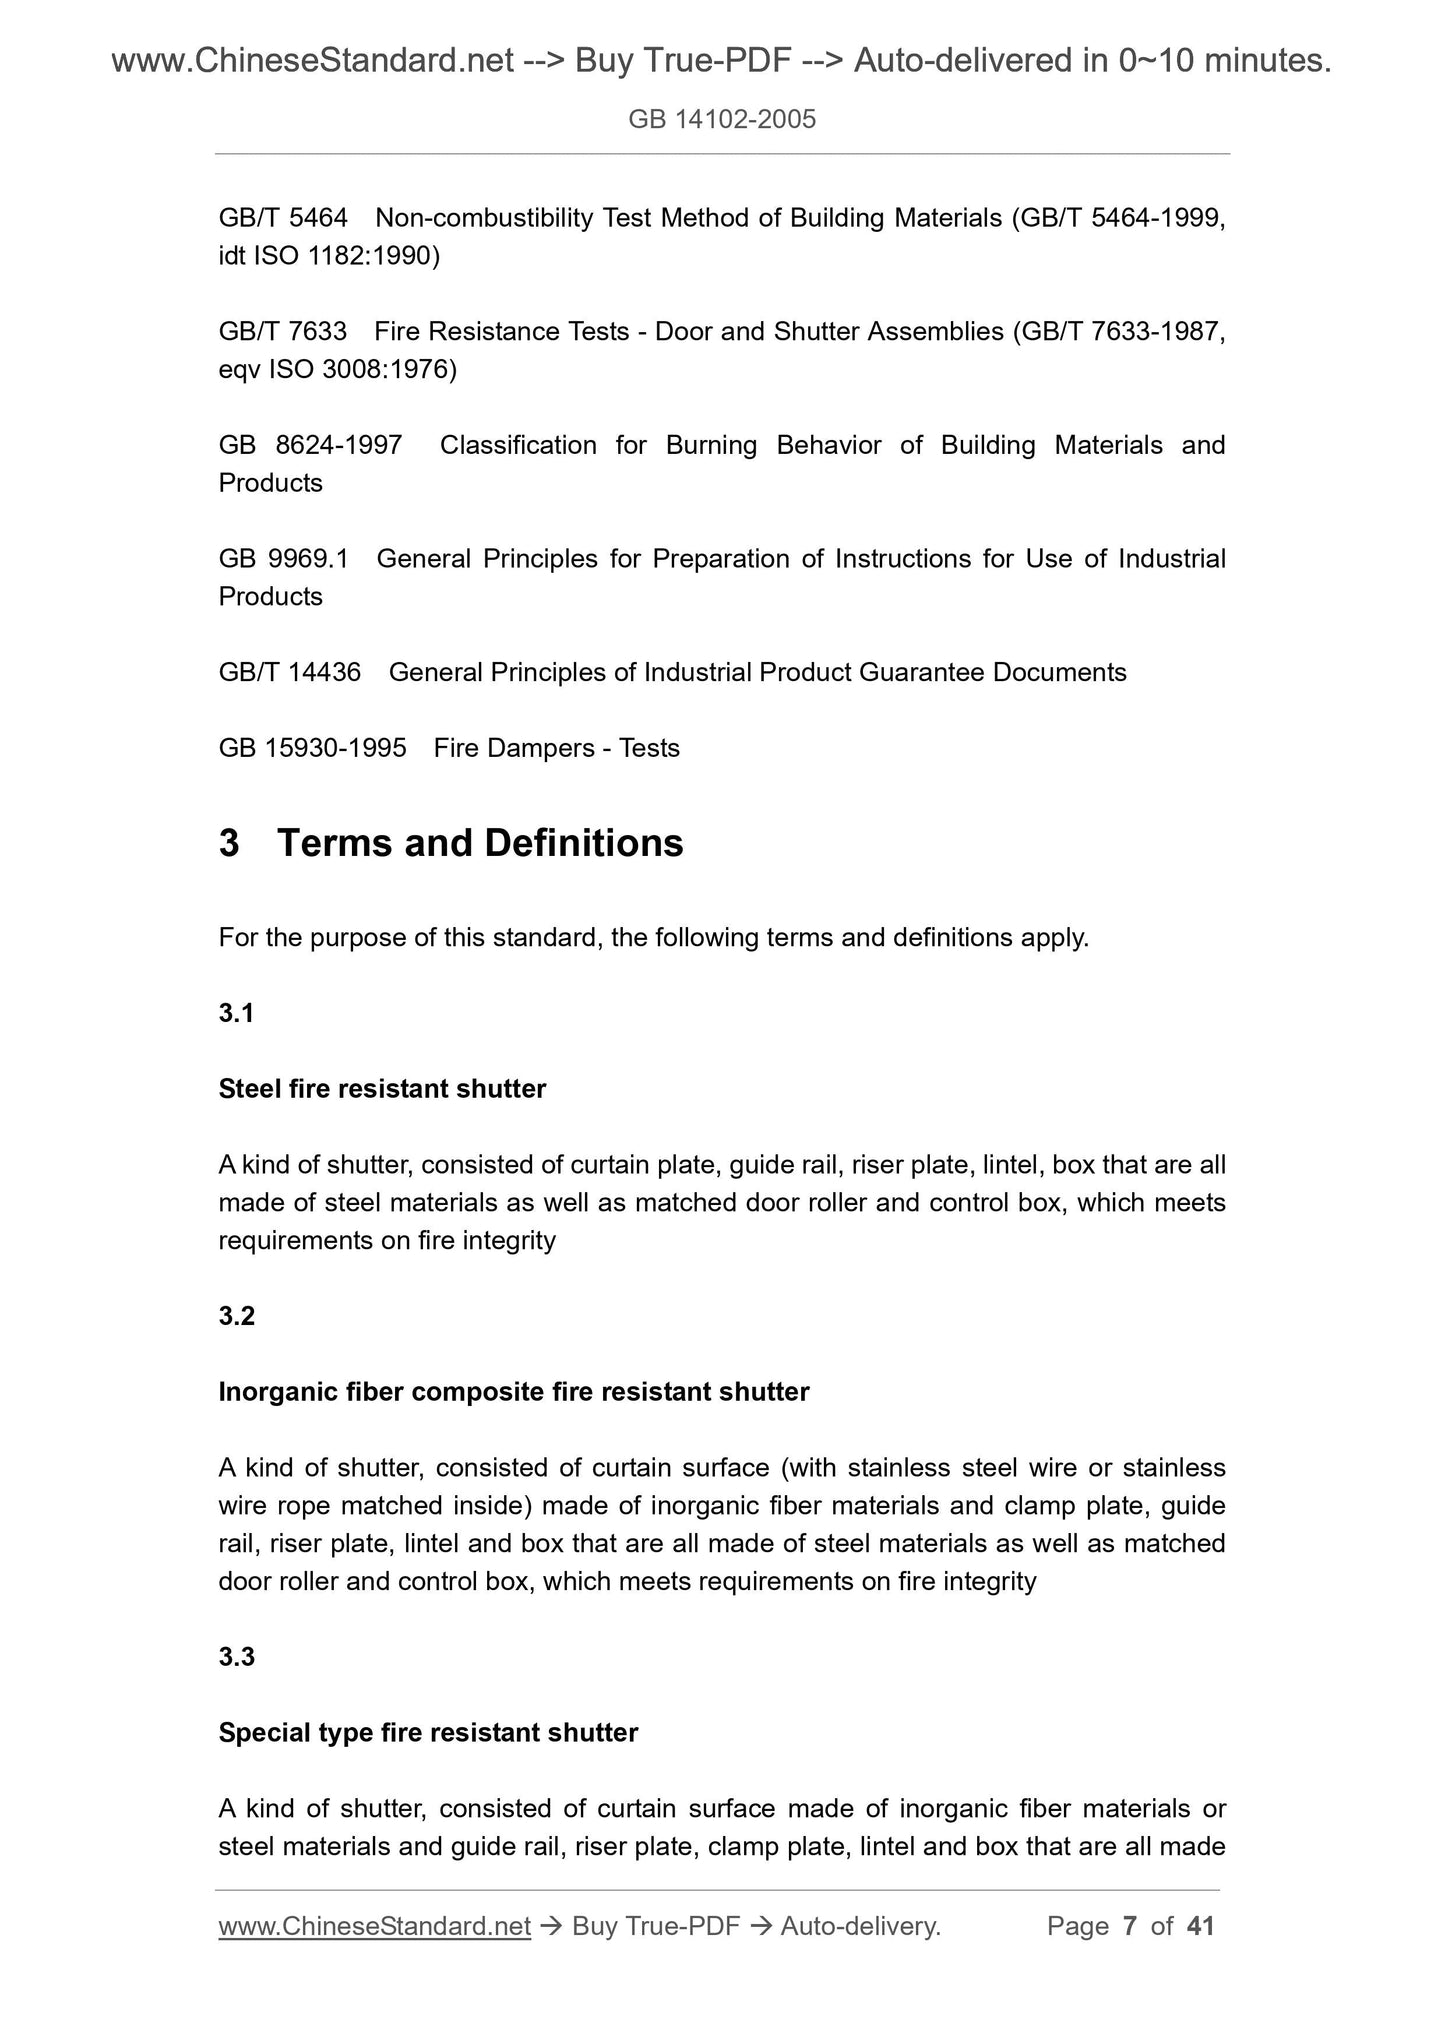 GB 14102-2005 Page 4